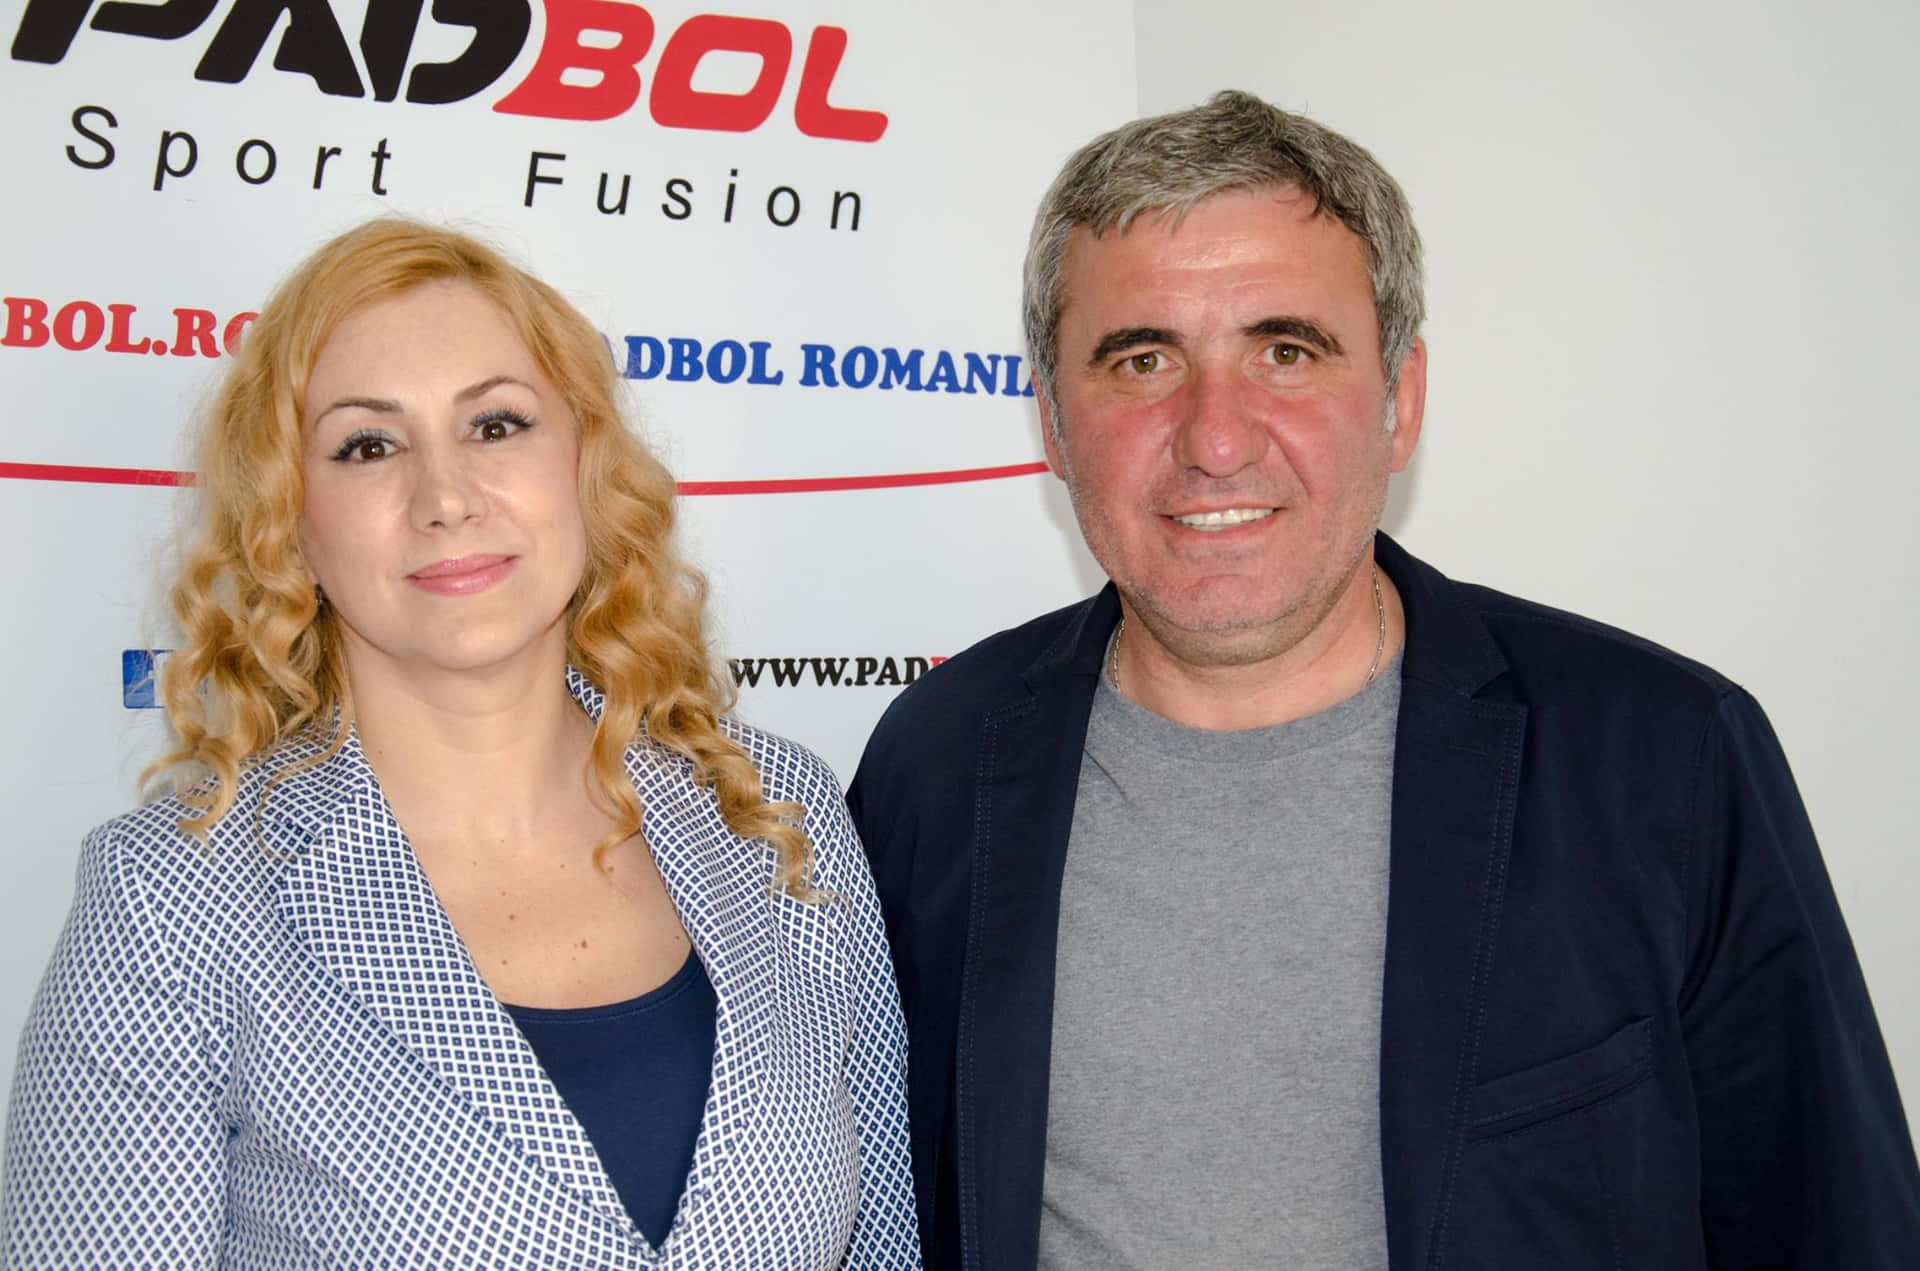 Caption: Gheorghe Hagi with Elisabeta Gherghisan in a Candid Moment Wallpaper